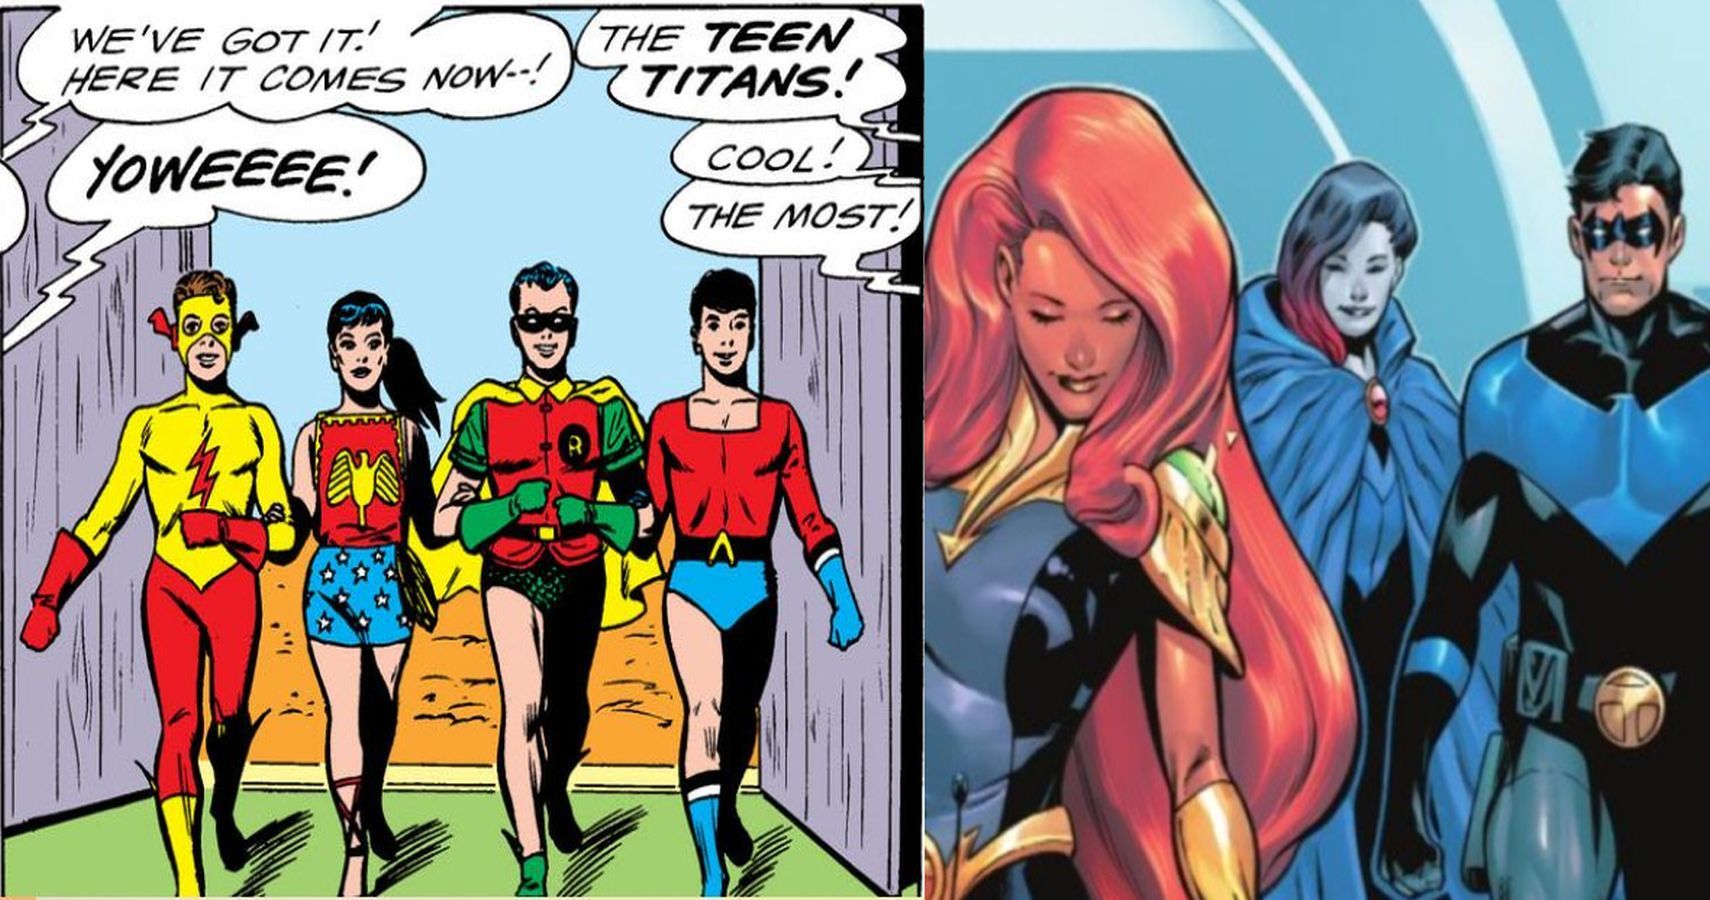 Dover Comic Con - On April 30,1964,the Teen Titans made their debut in DC's The  Brave and The Bold. Since then, they've been a staple in comics history,  forming multiple comic book